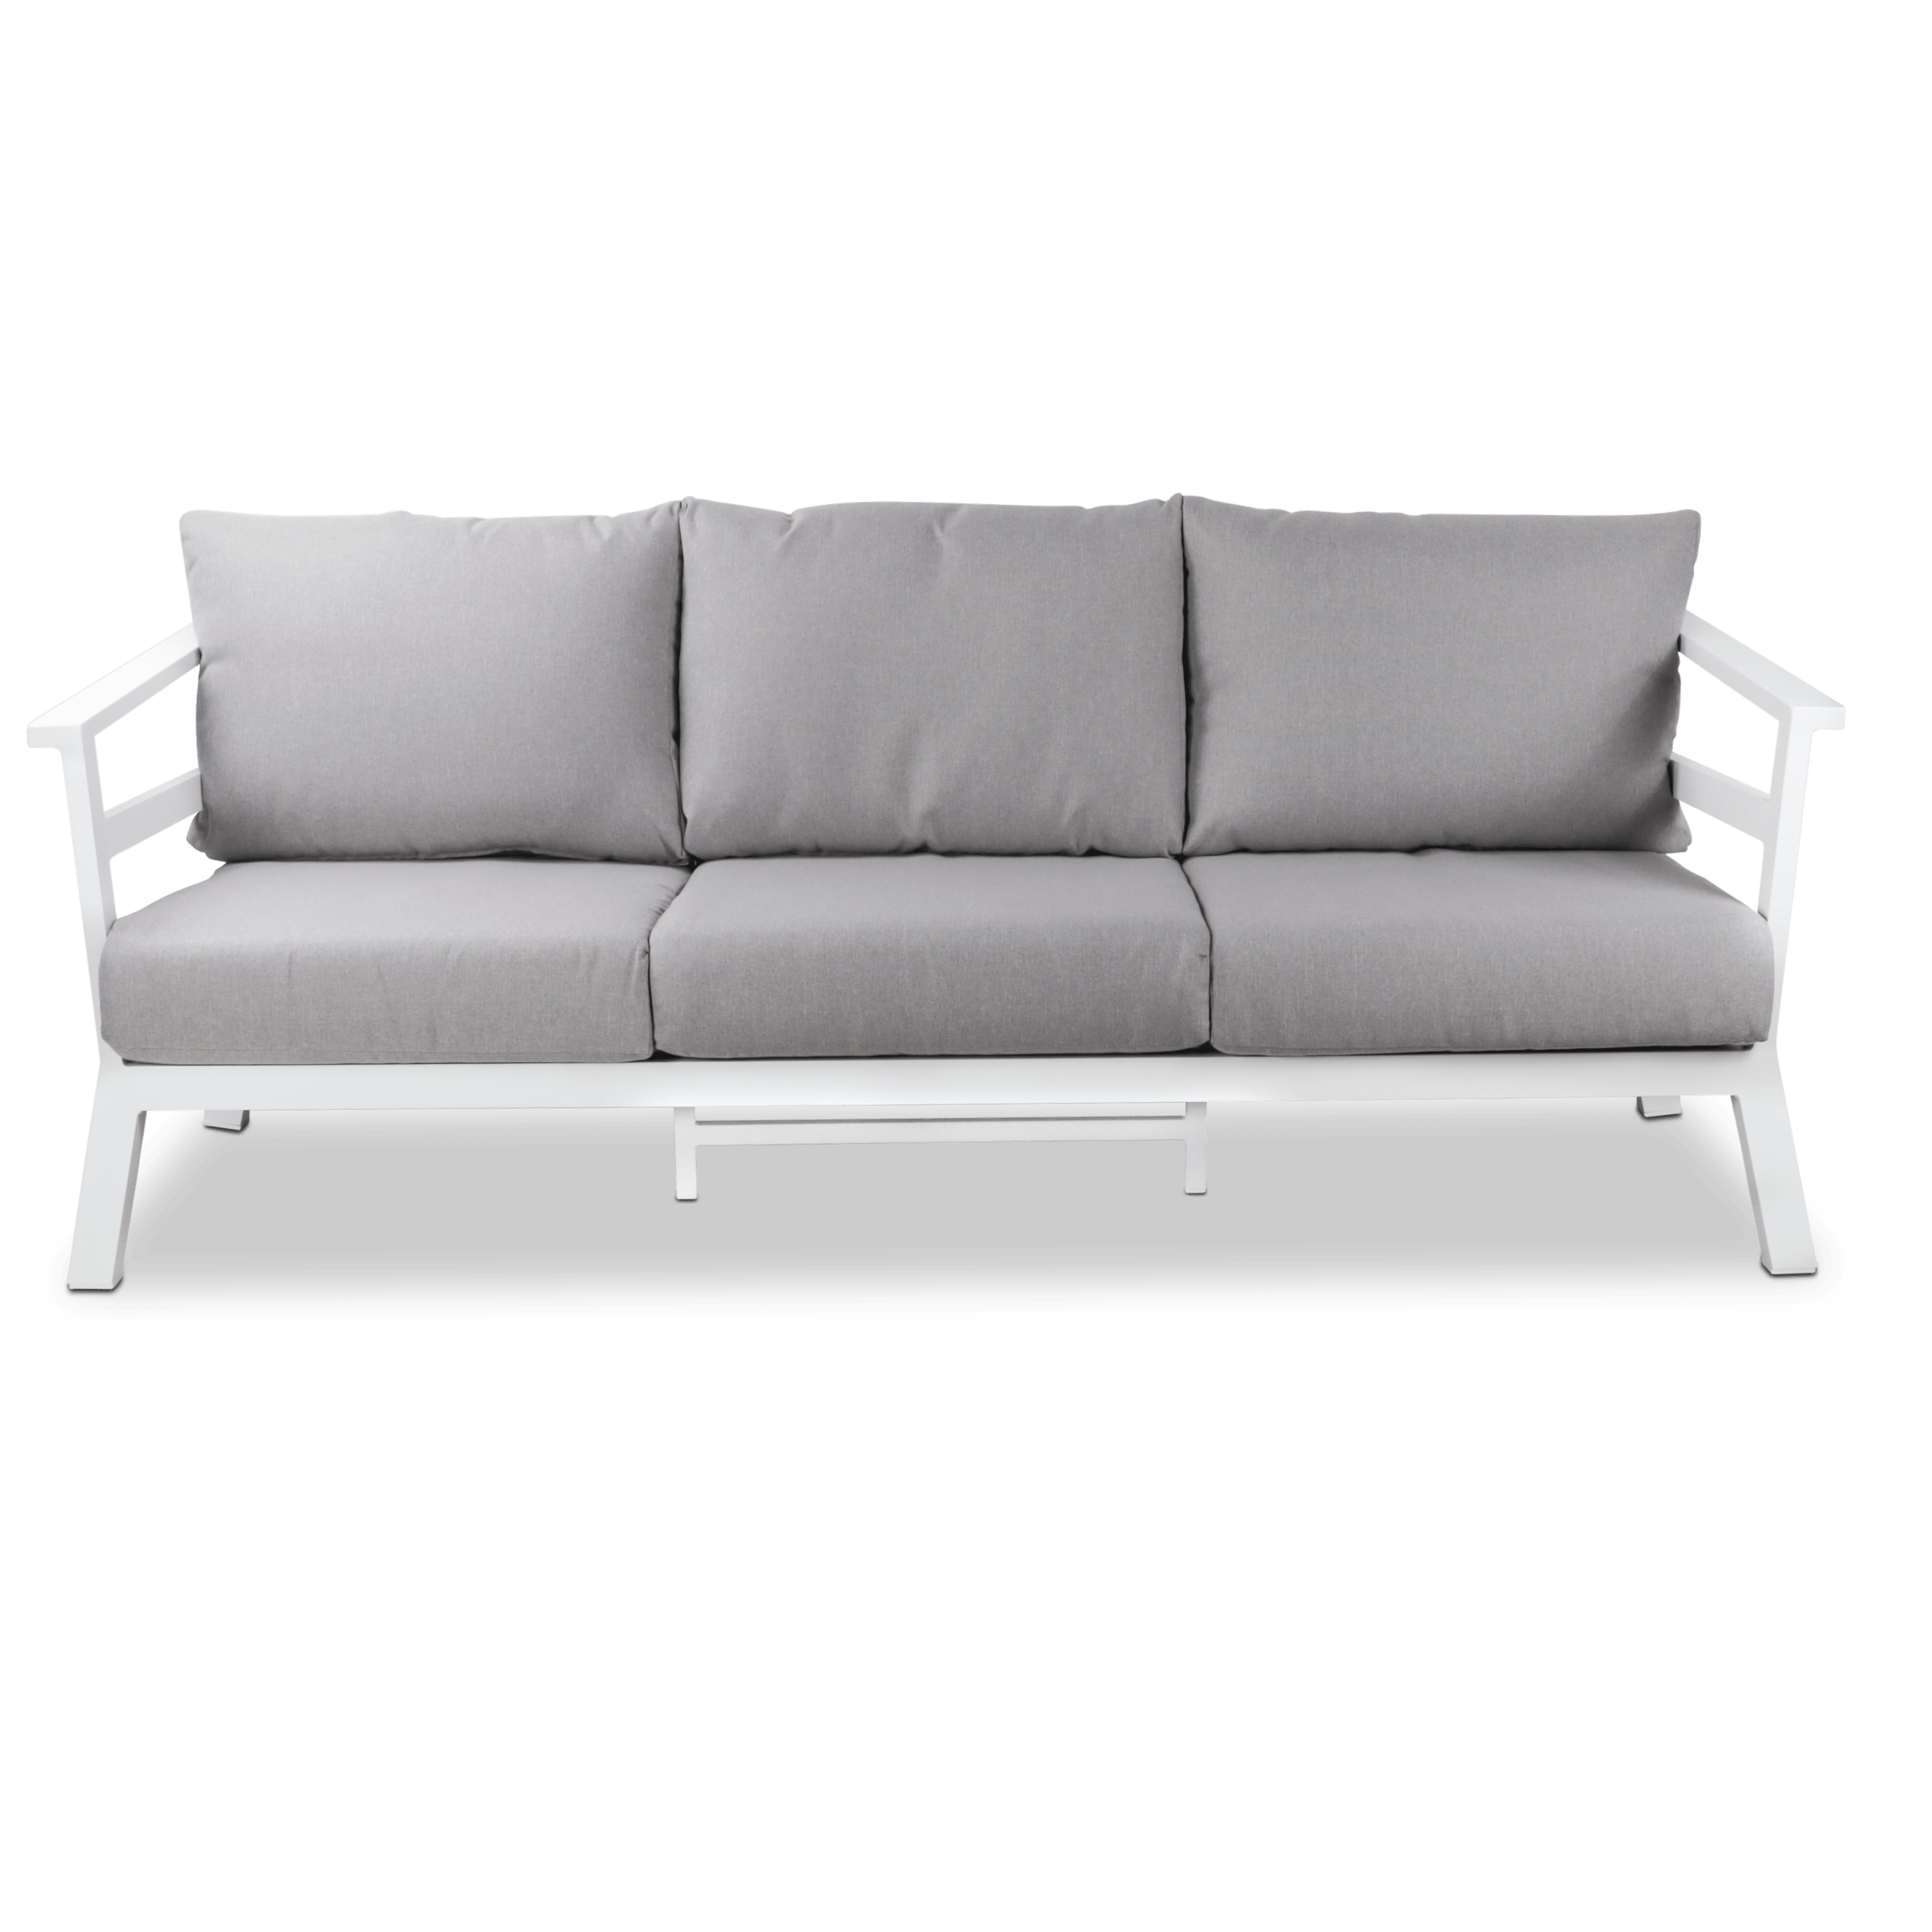 Aveiro 3 Seater in Arctic White with Stone Olefin Cushions - The Furniture Shack